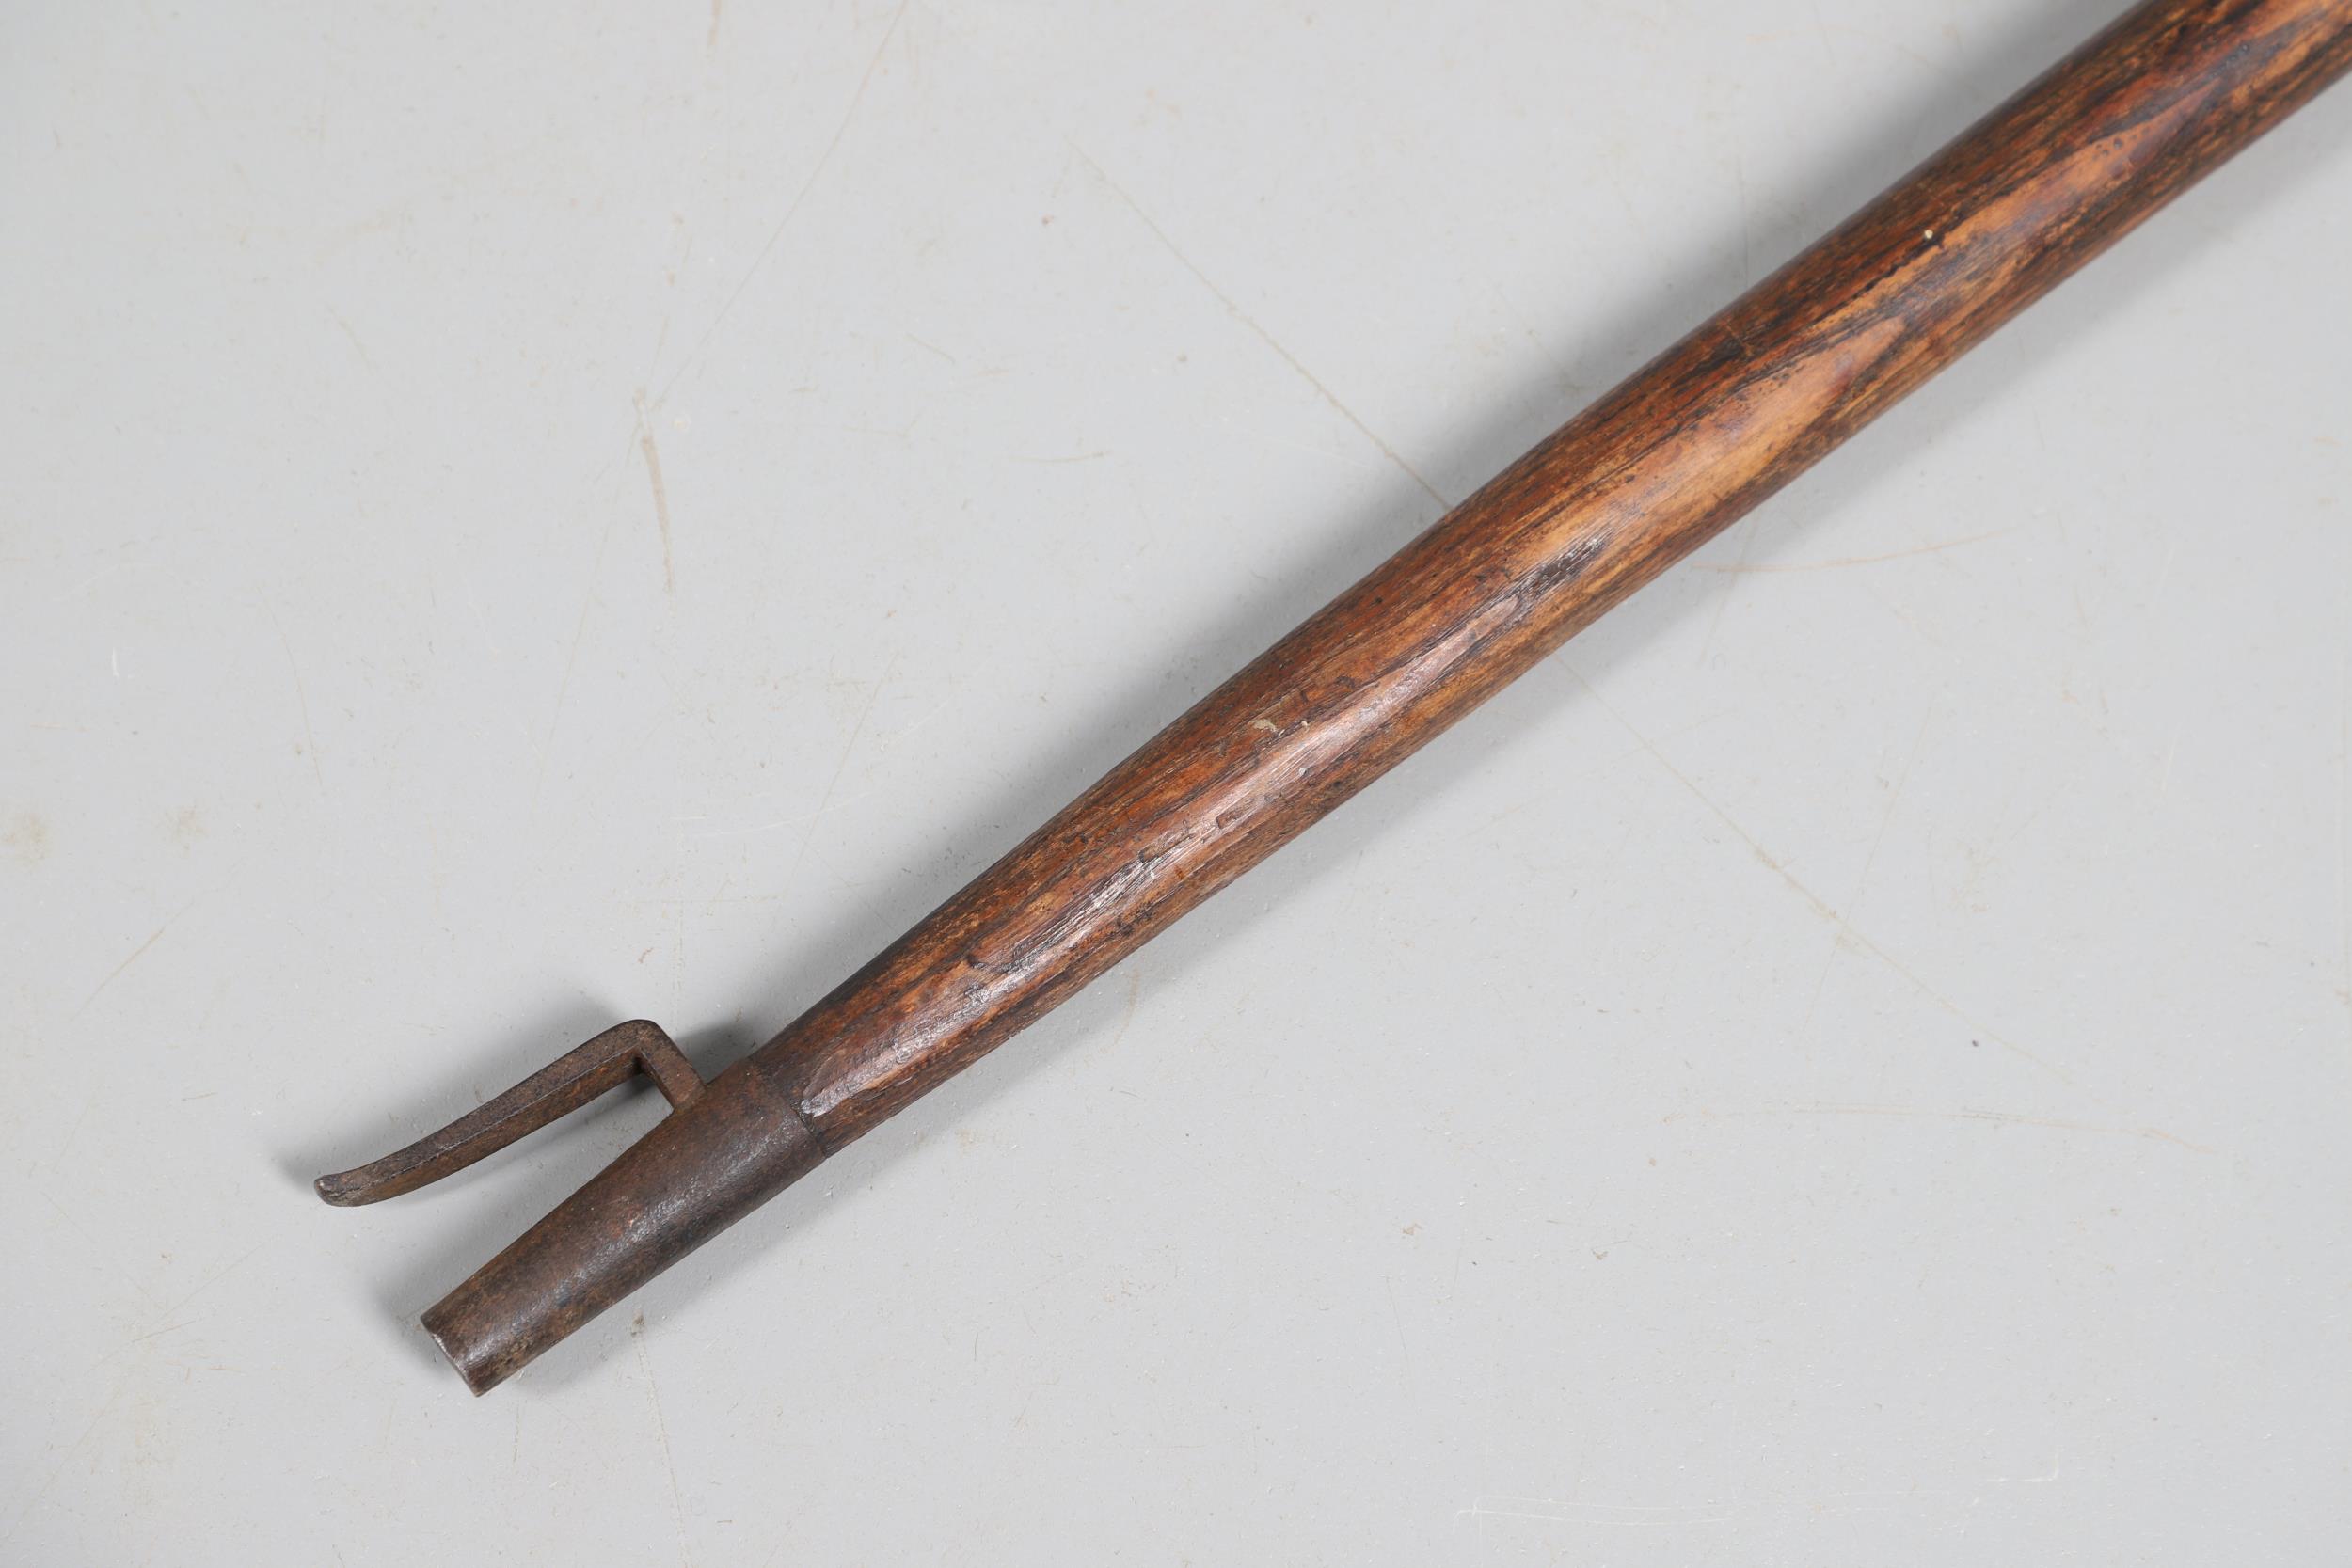 A SUBSTANTIAL PERSIAN OR OTTOMAN TWO HANDLED AXE. - Image 5 of 11